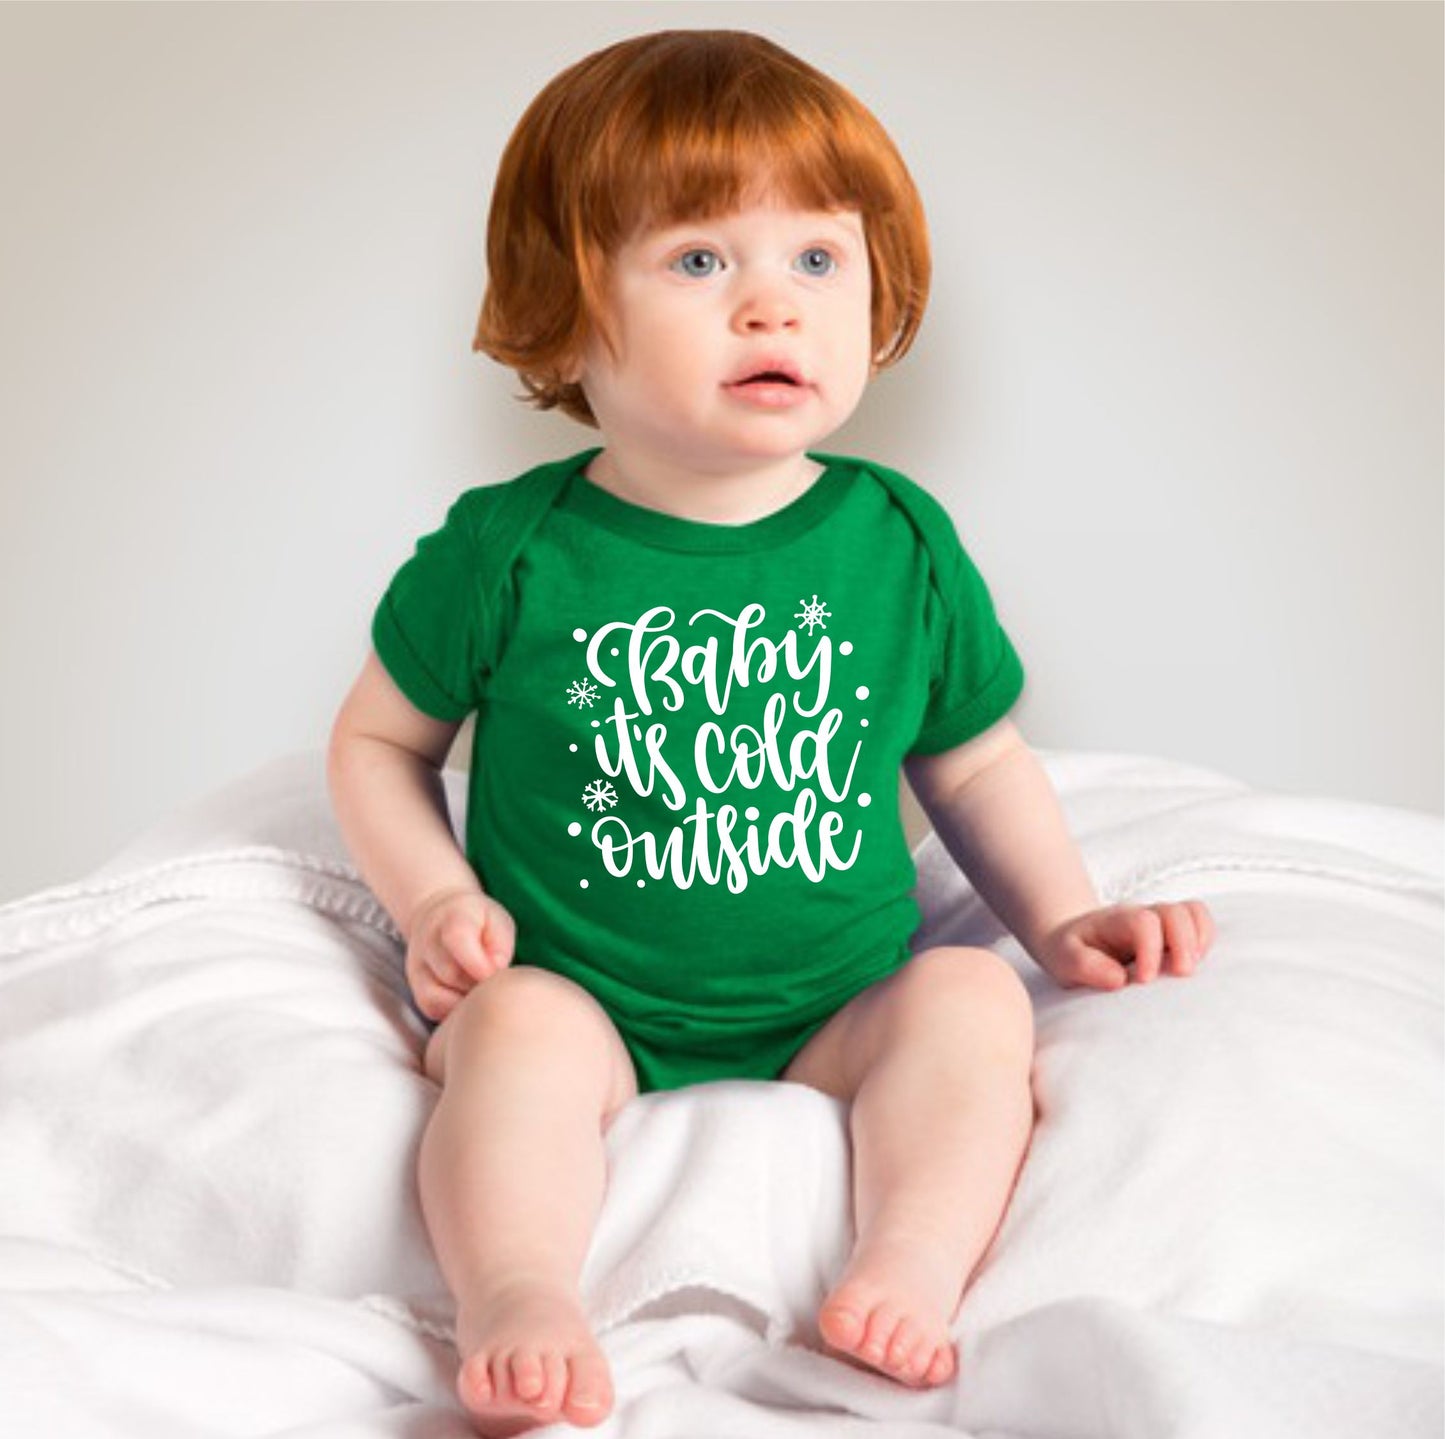 Baby Christmas Holiday Onesies - Its Cold Outside